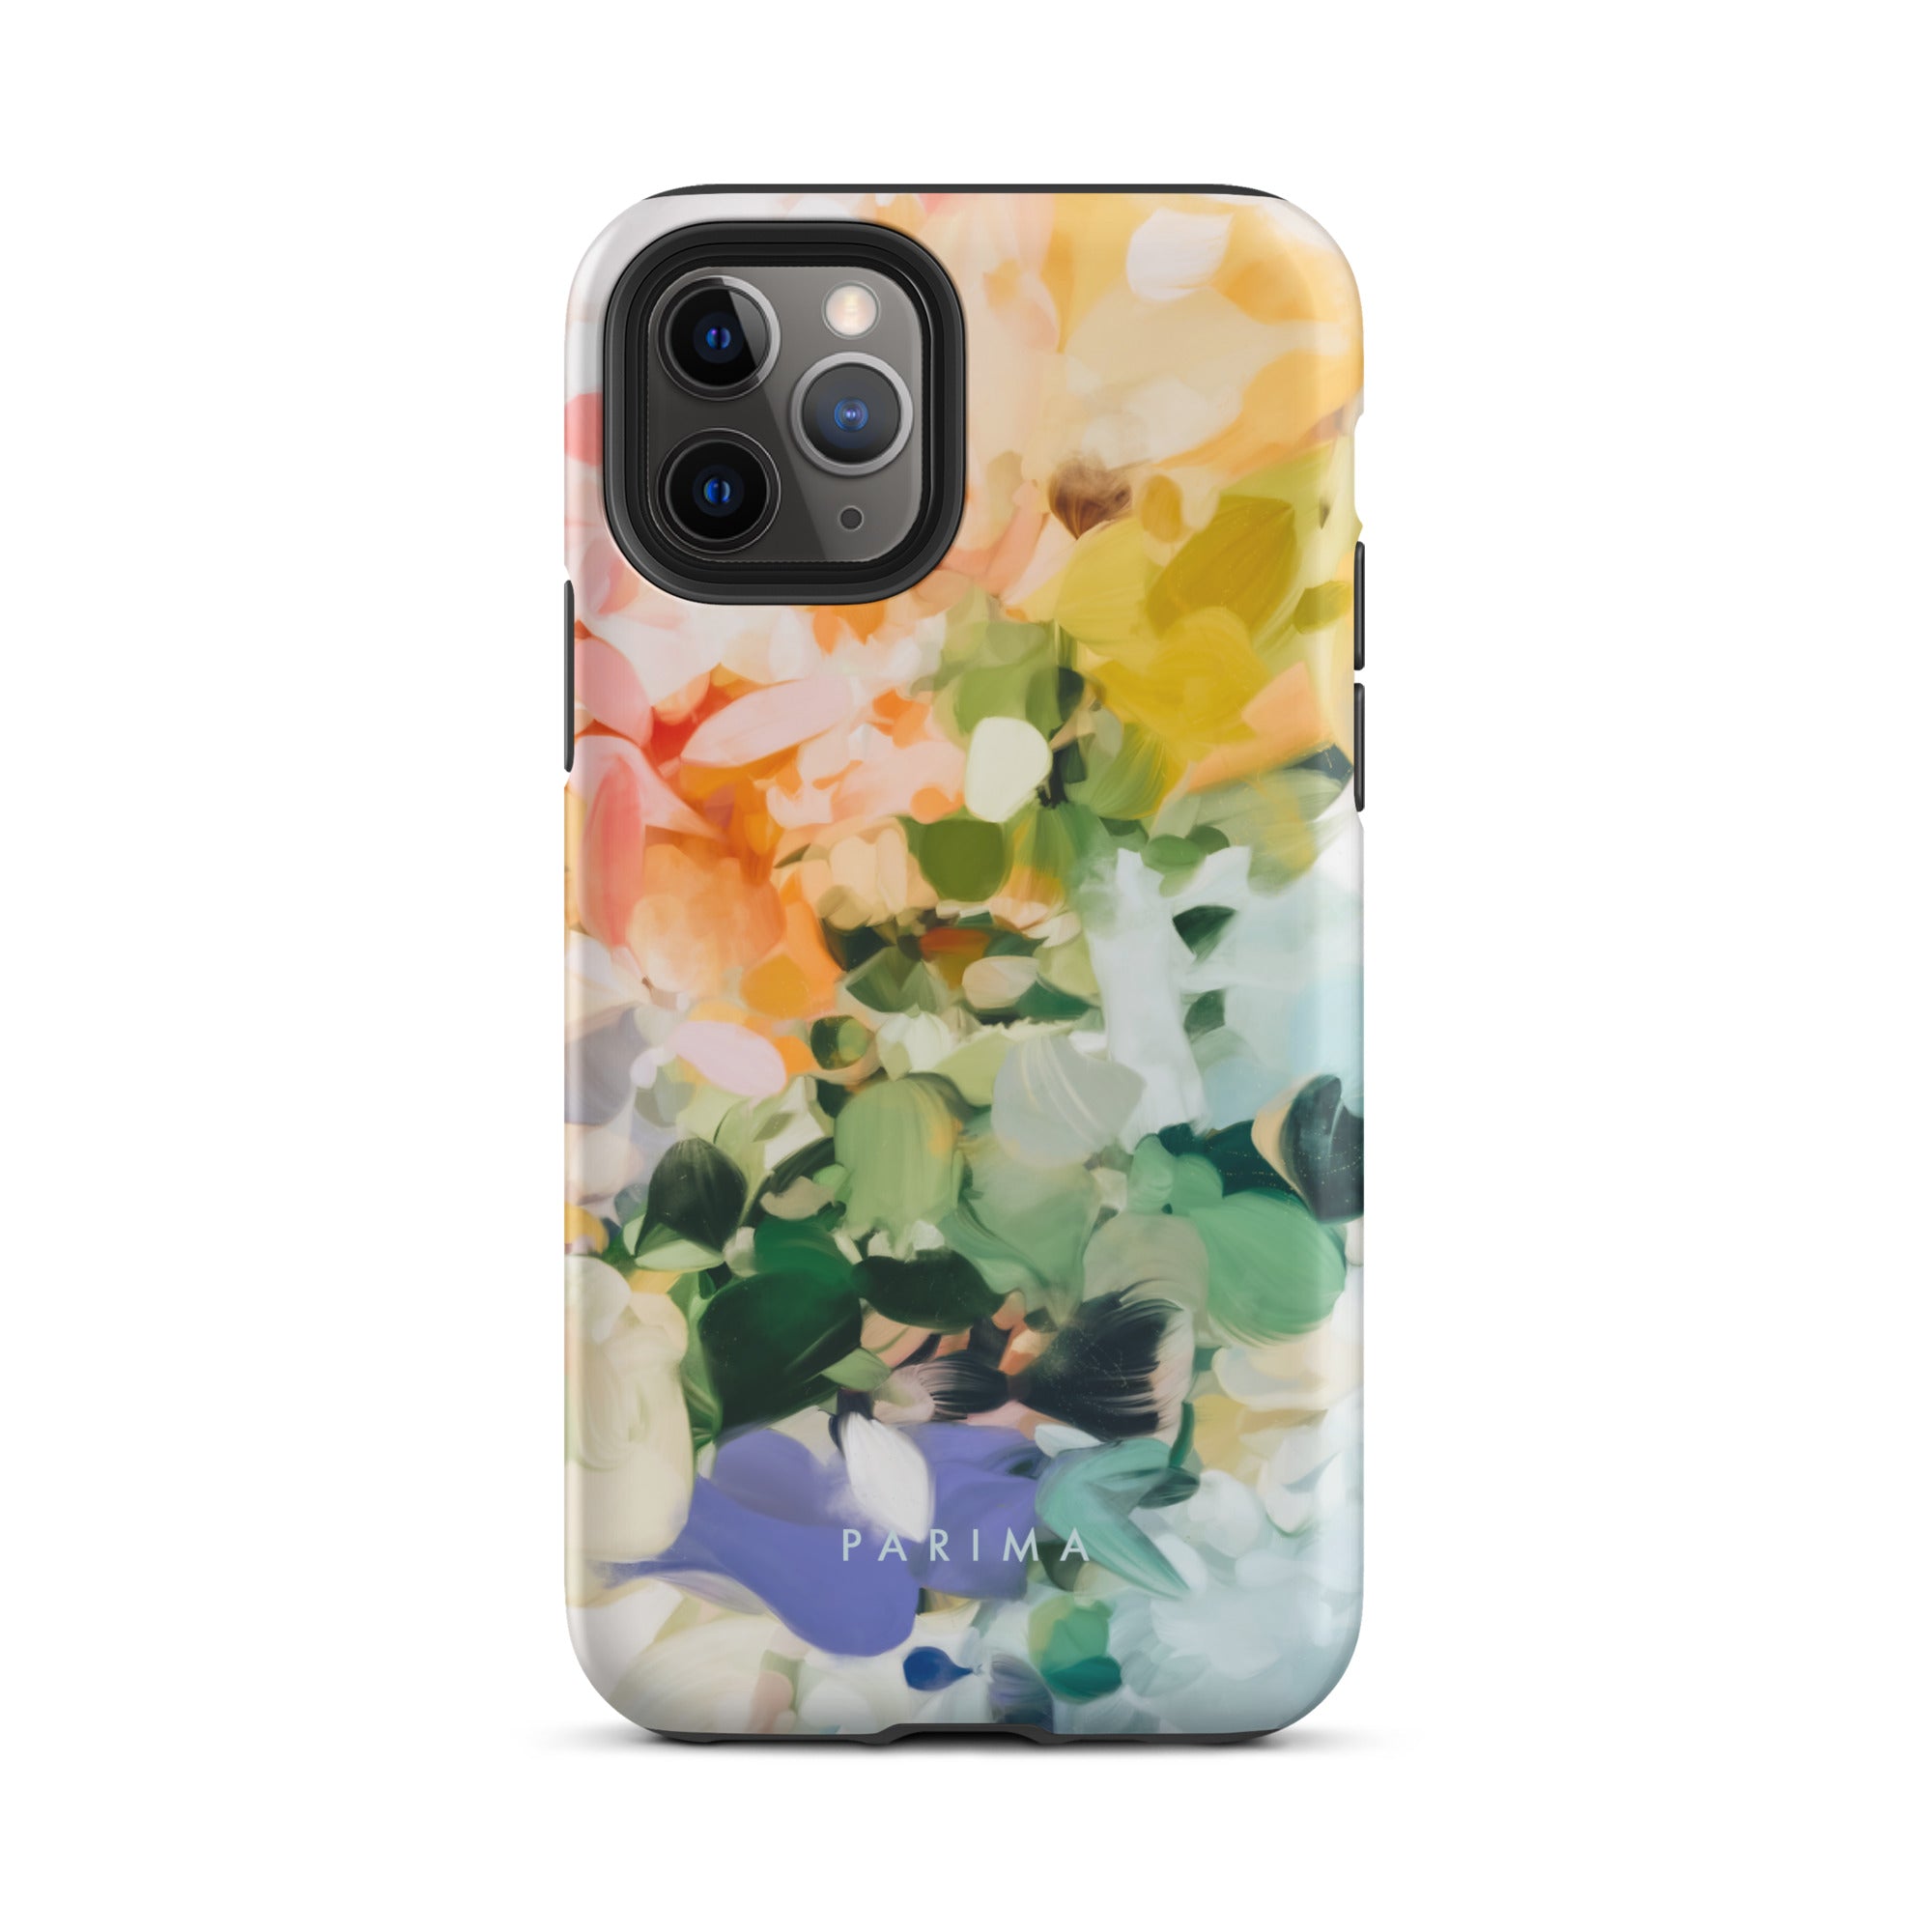 June, green and yellow abstract art - iPhone 11 Pro tough case by Parima Studio